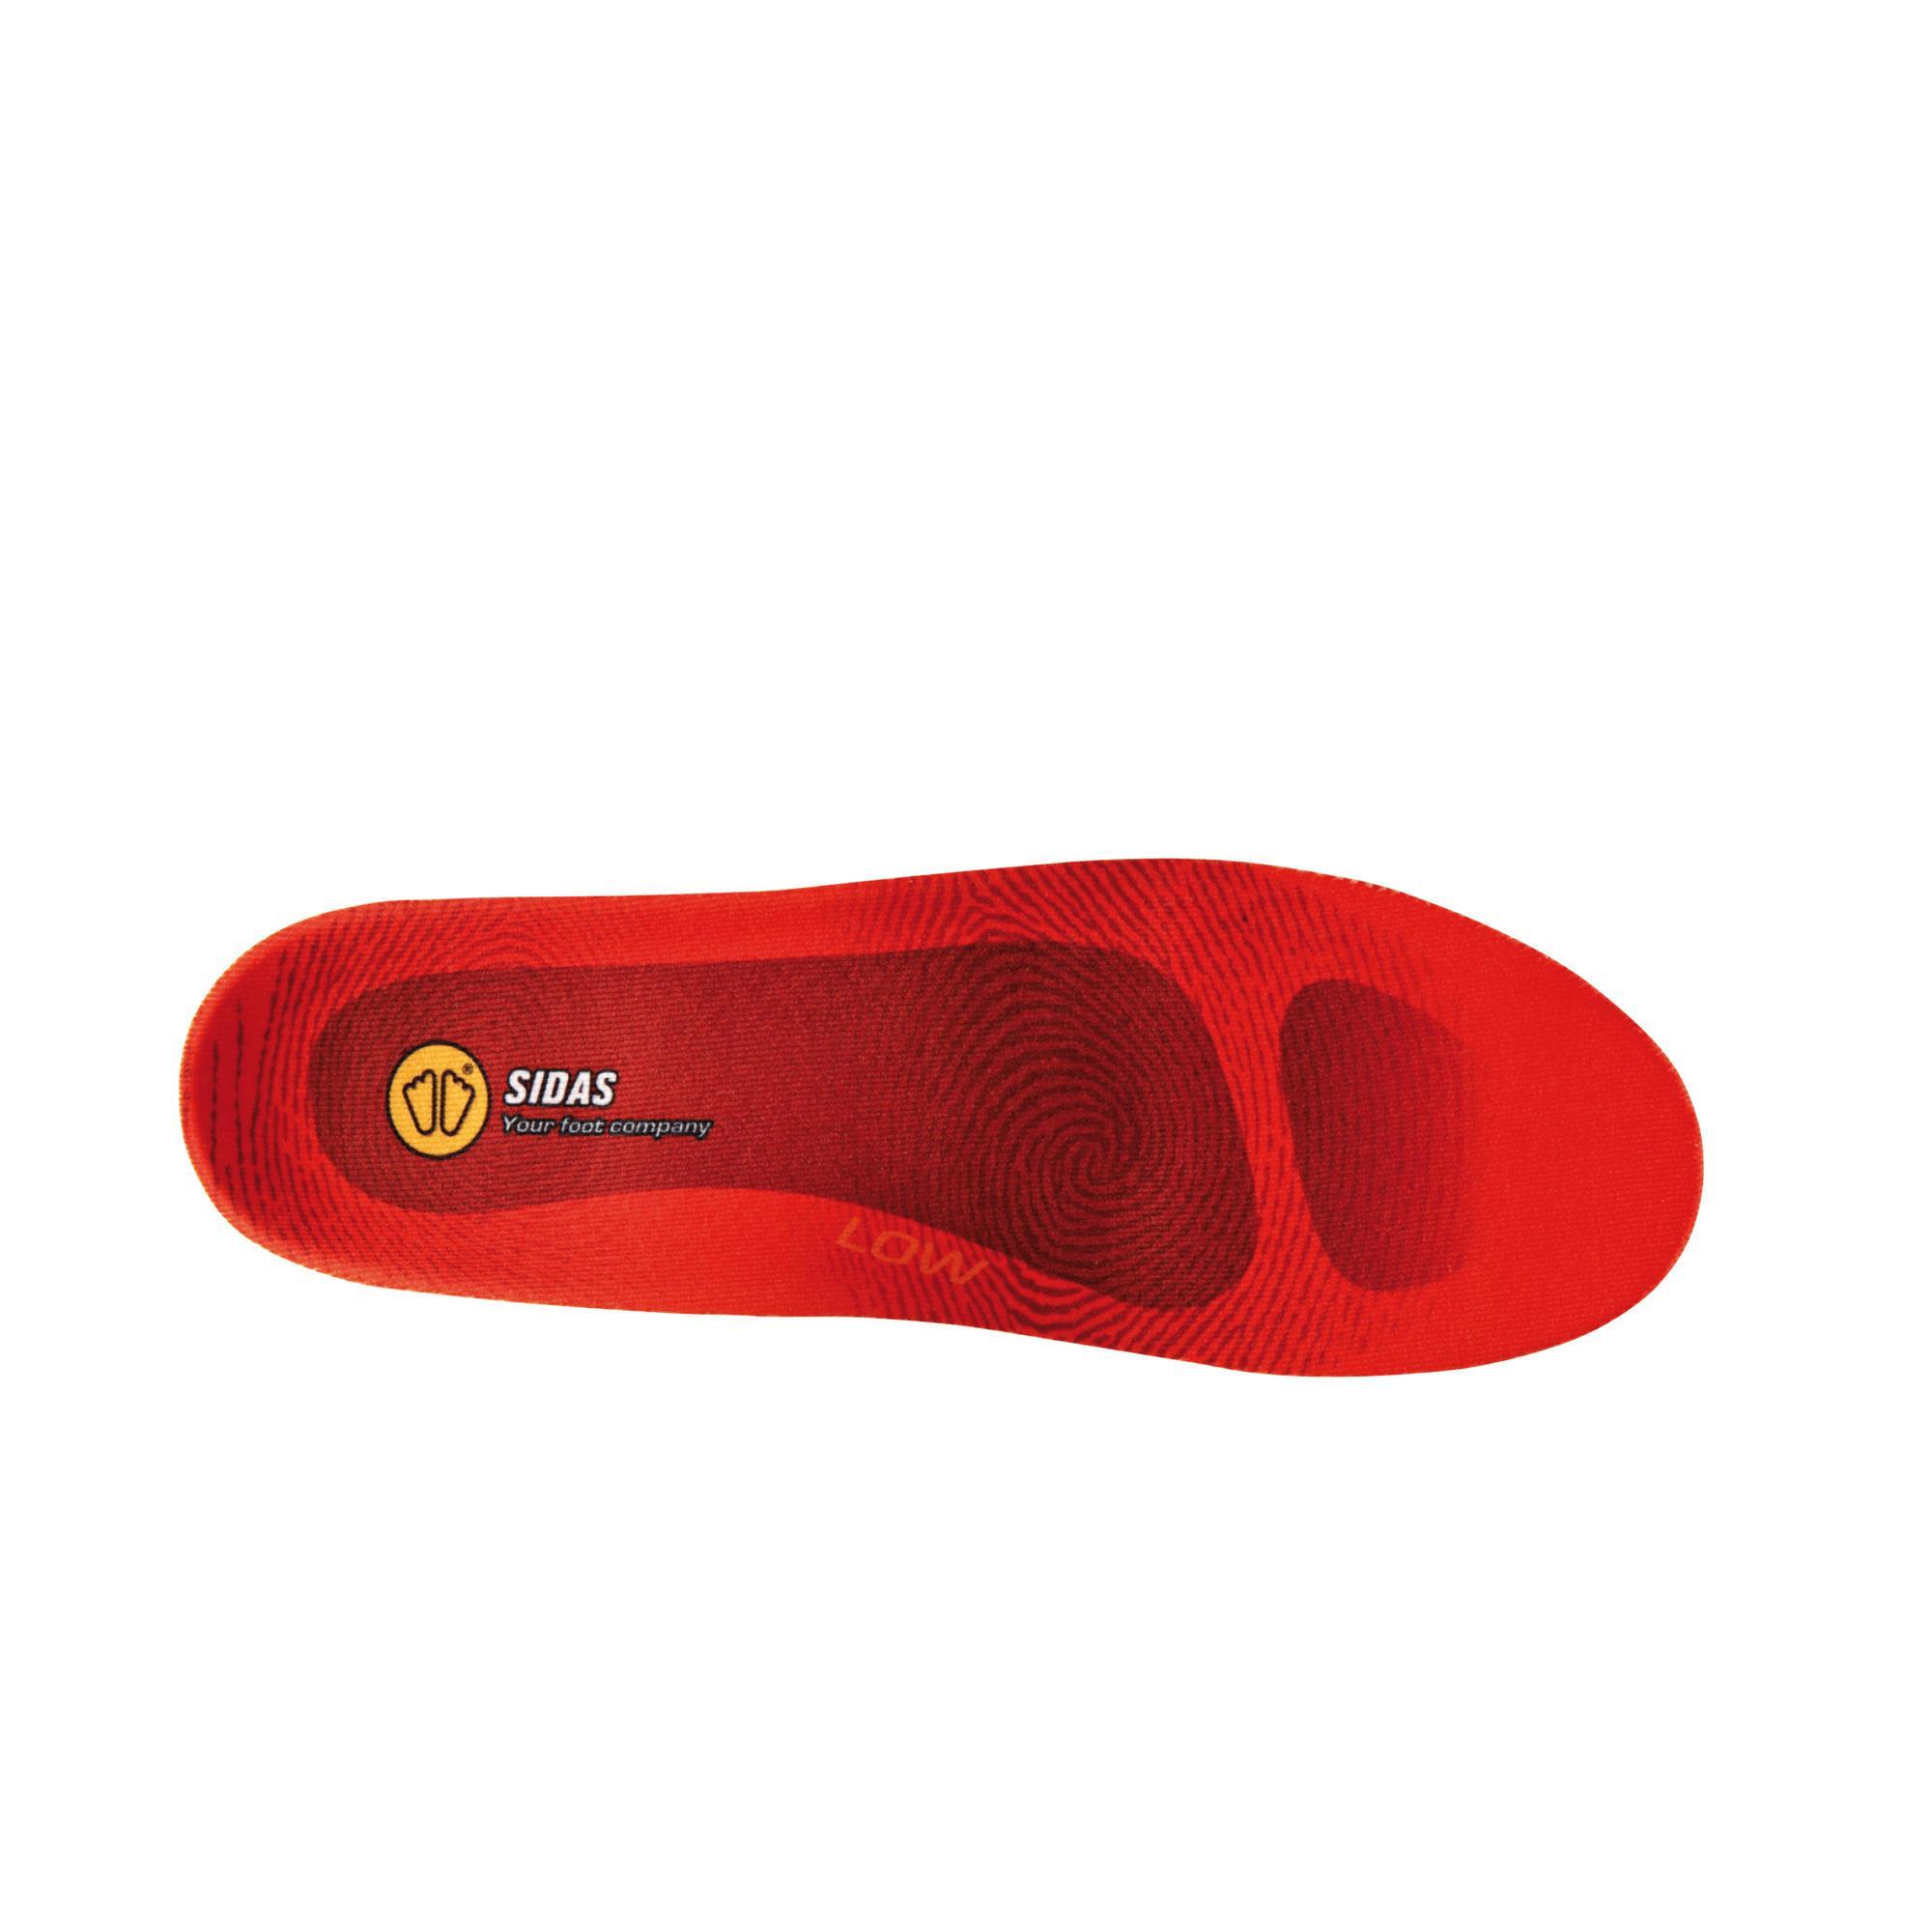 ski boot insoles for flat feet